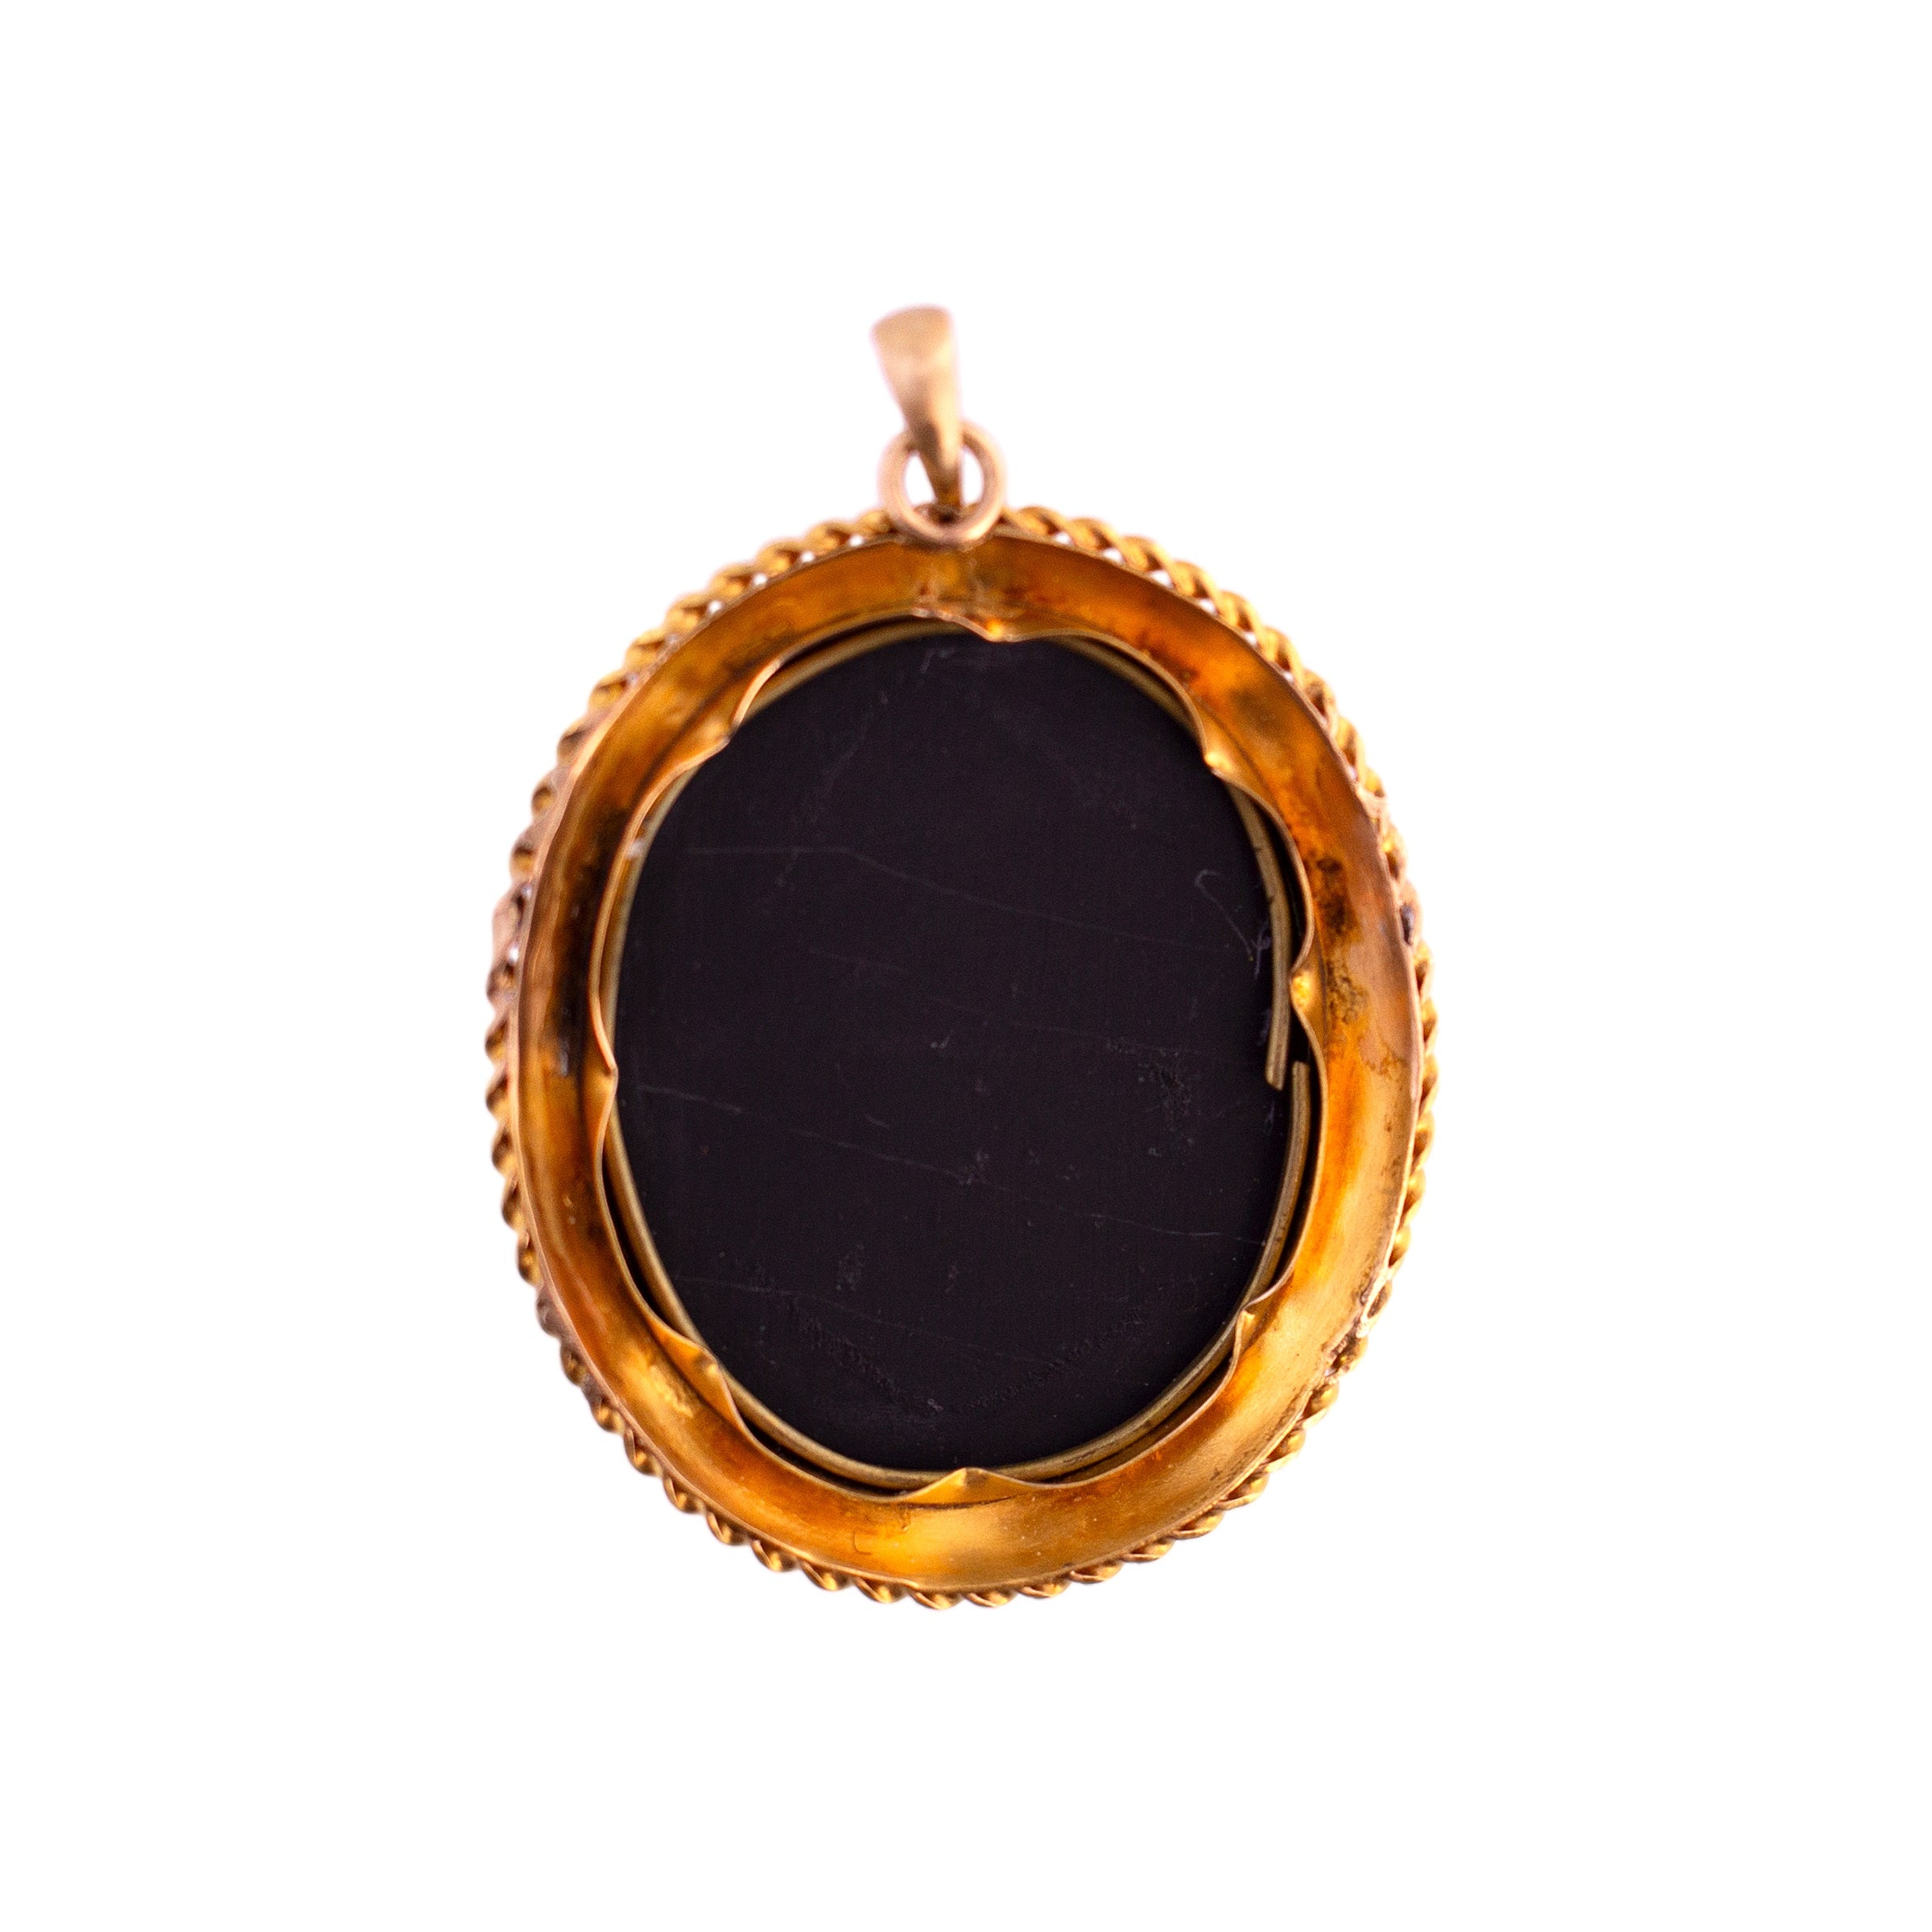 14K Gold Etruscan Revival High Relief Cameo Pendant